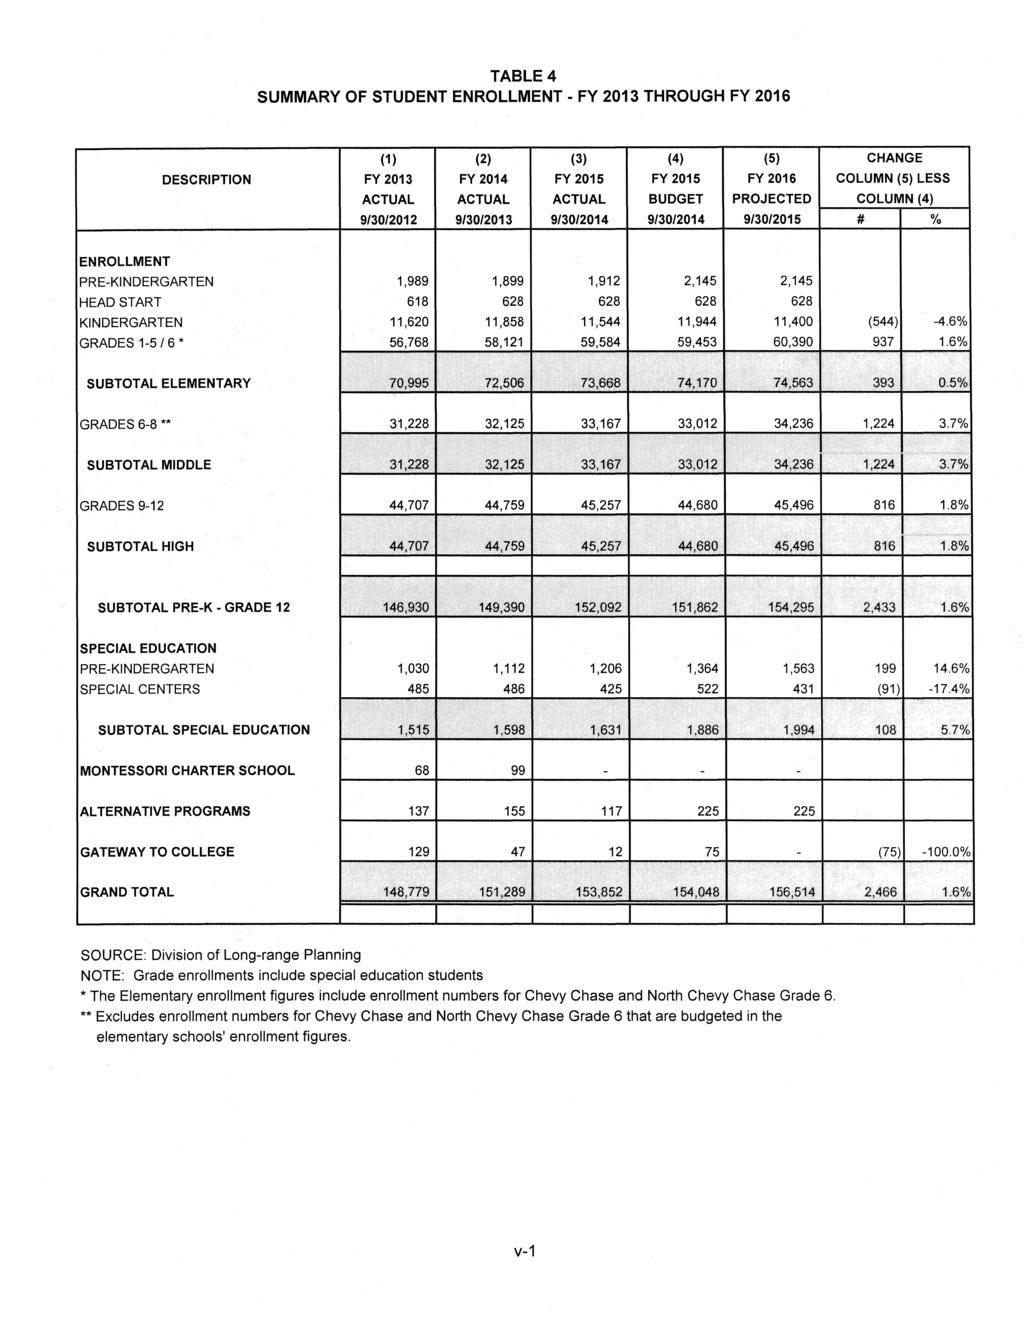 TABLE4 SUMMARY OF STUDENT ENROLLMENT- FY 2013 THROUGH FY 2016 (1) (2) (3) (4) (5) DESCRPTON FY 2013 FY 2014 FY 2015 FY 2015 FY 2016 ACTUAL ACTUAL ACTUAL BUDGET PROJECTED 9/30/2012 9/30/2013 9/30/2014